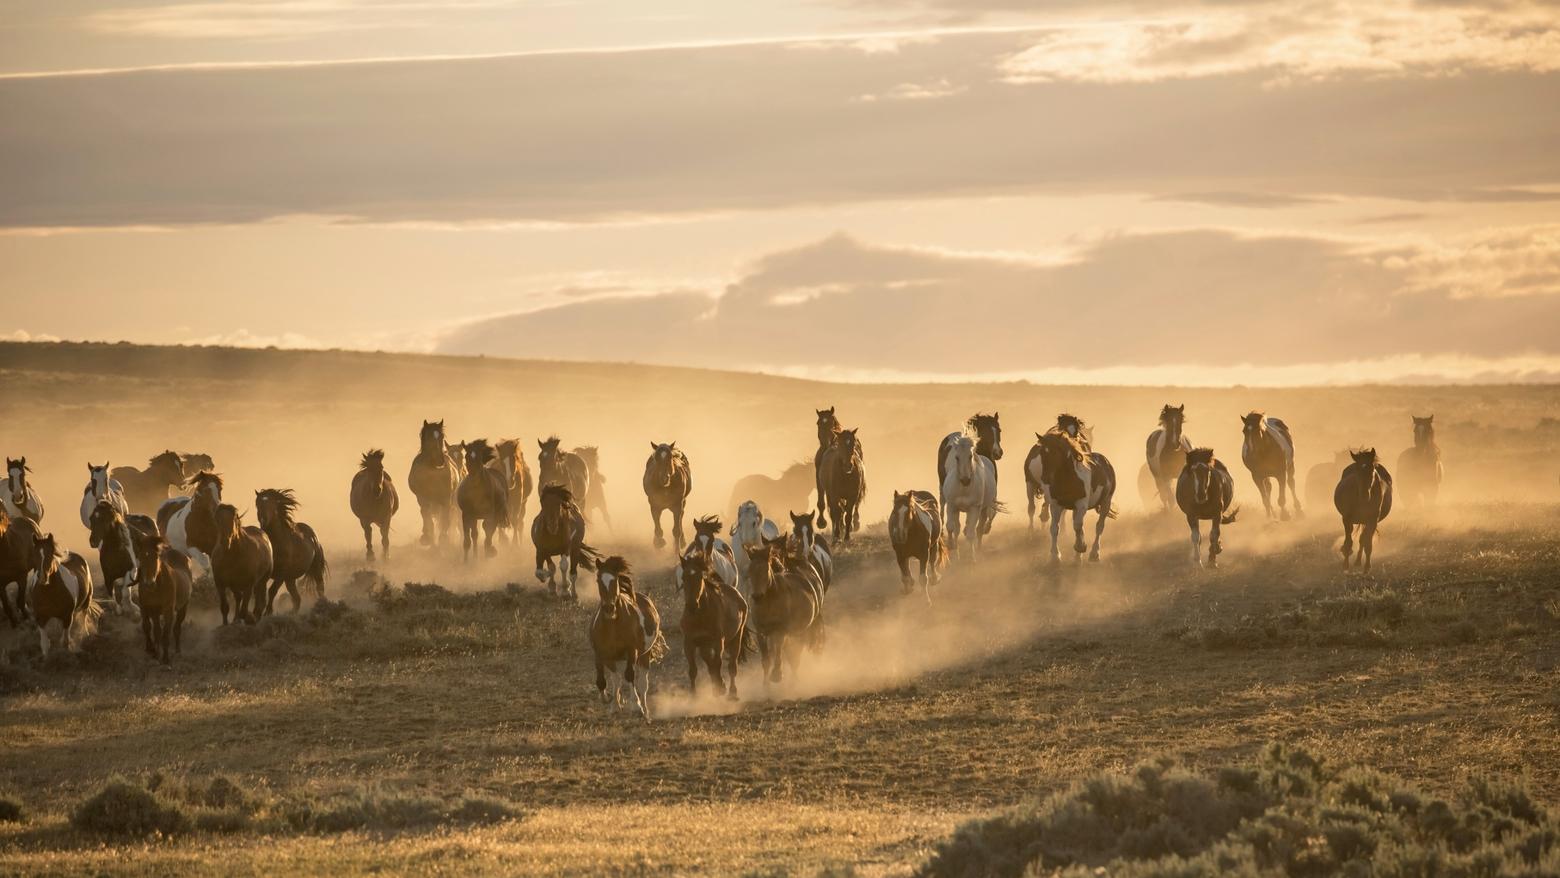 The Bureau of Land Management was tasked with managing wild horses in 1971. At approximately 170 horses, the McCullough Peaks herd east of Cody, Wyoming, needs to be managed down by 41 animals, according to BLM officials. Wild horse advocates say BLM numbers are flawed. Photo by Sandy Sisti